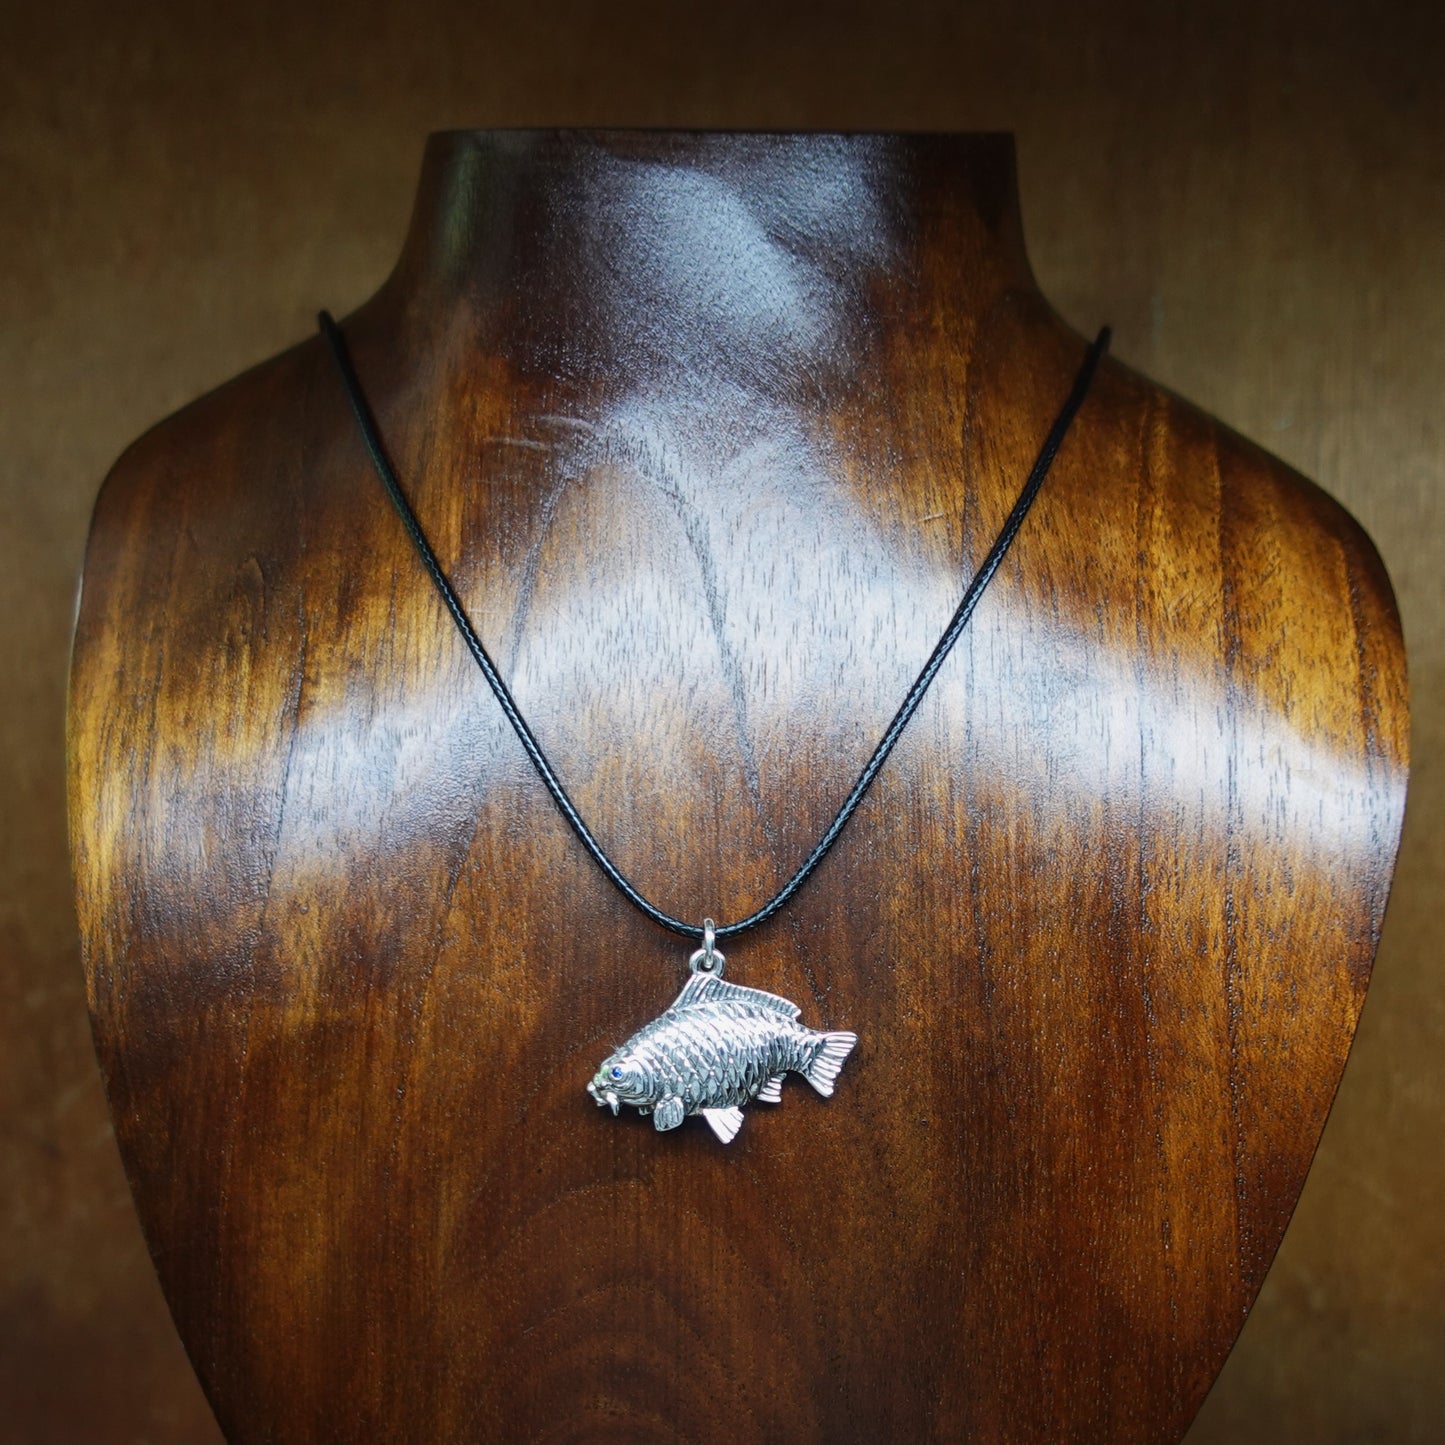 Common Carp fishing necklace. Made from sterling silver with an antiqued finish, set with a gemstone eye. Ideal fisherman’s angling gift © Adrian Ashley